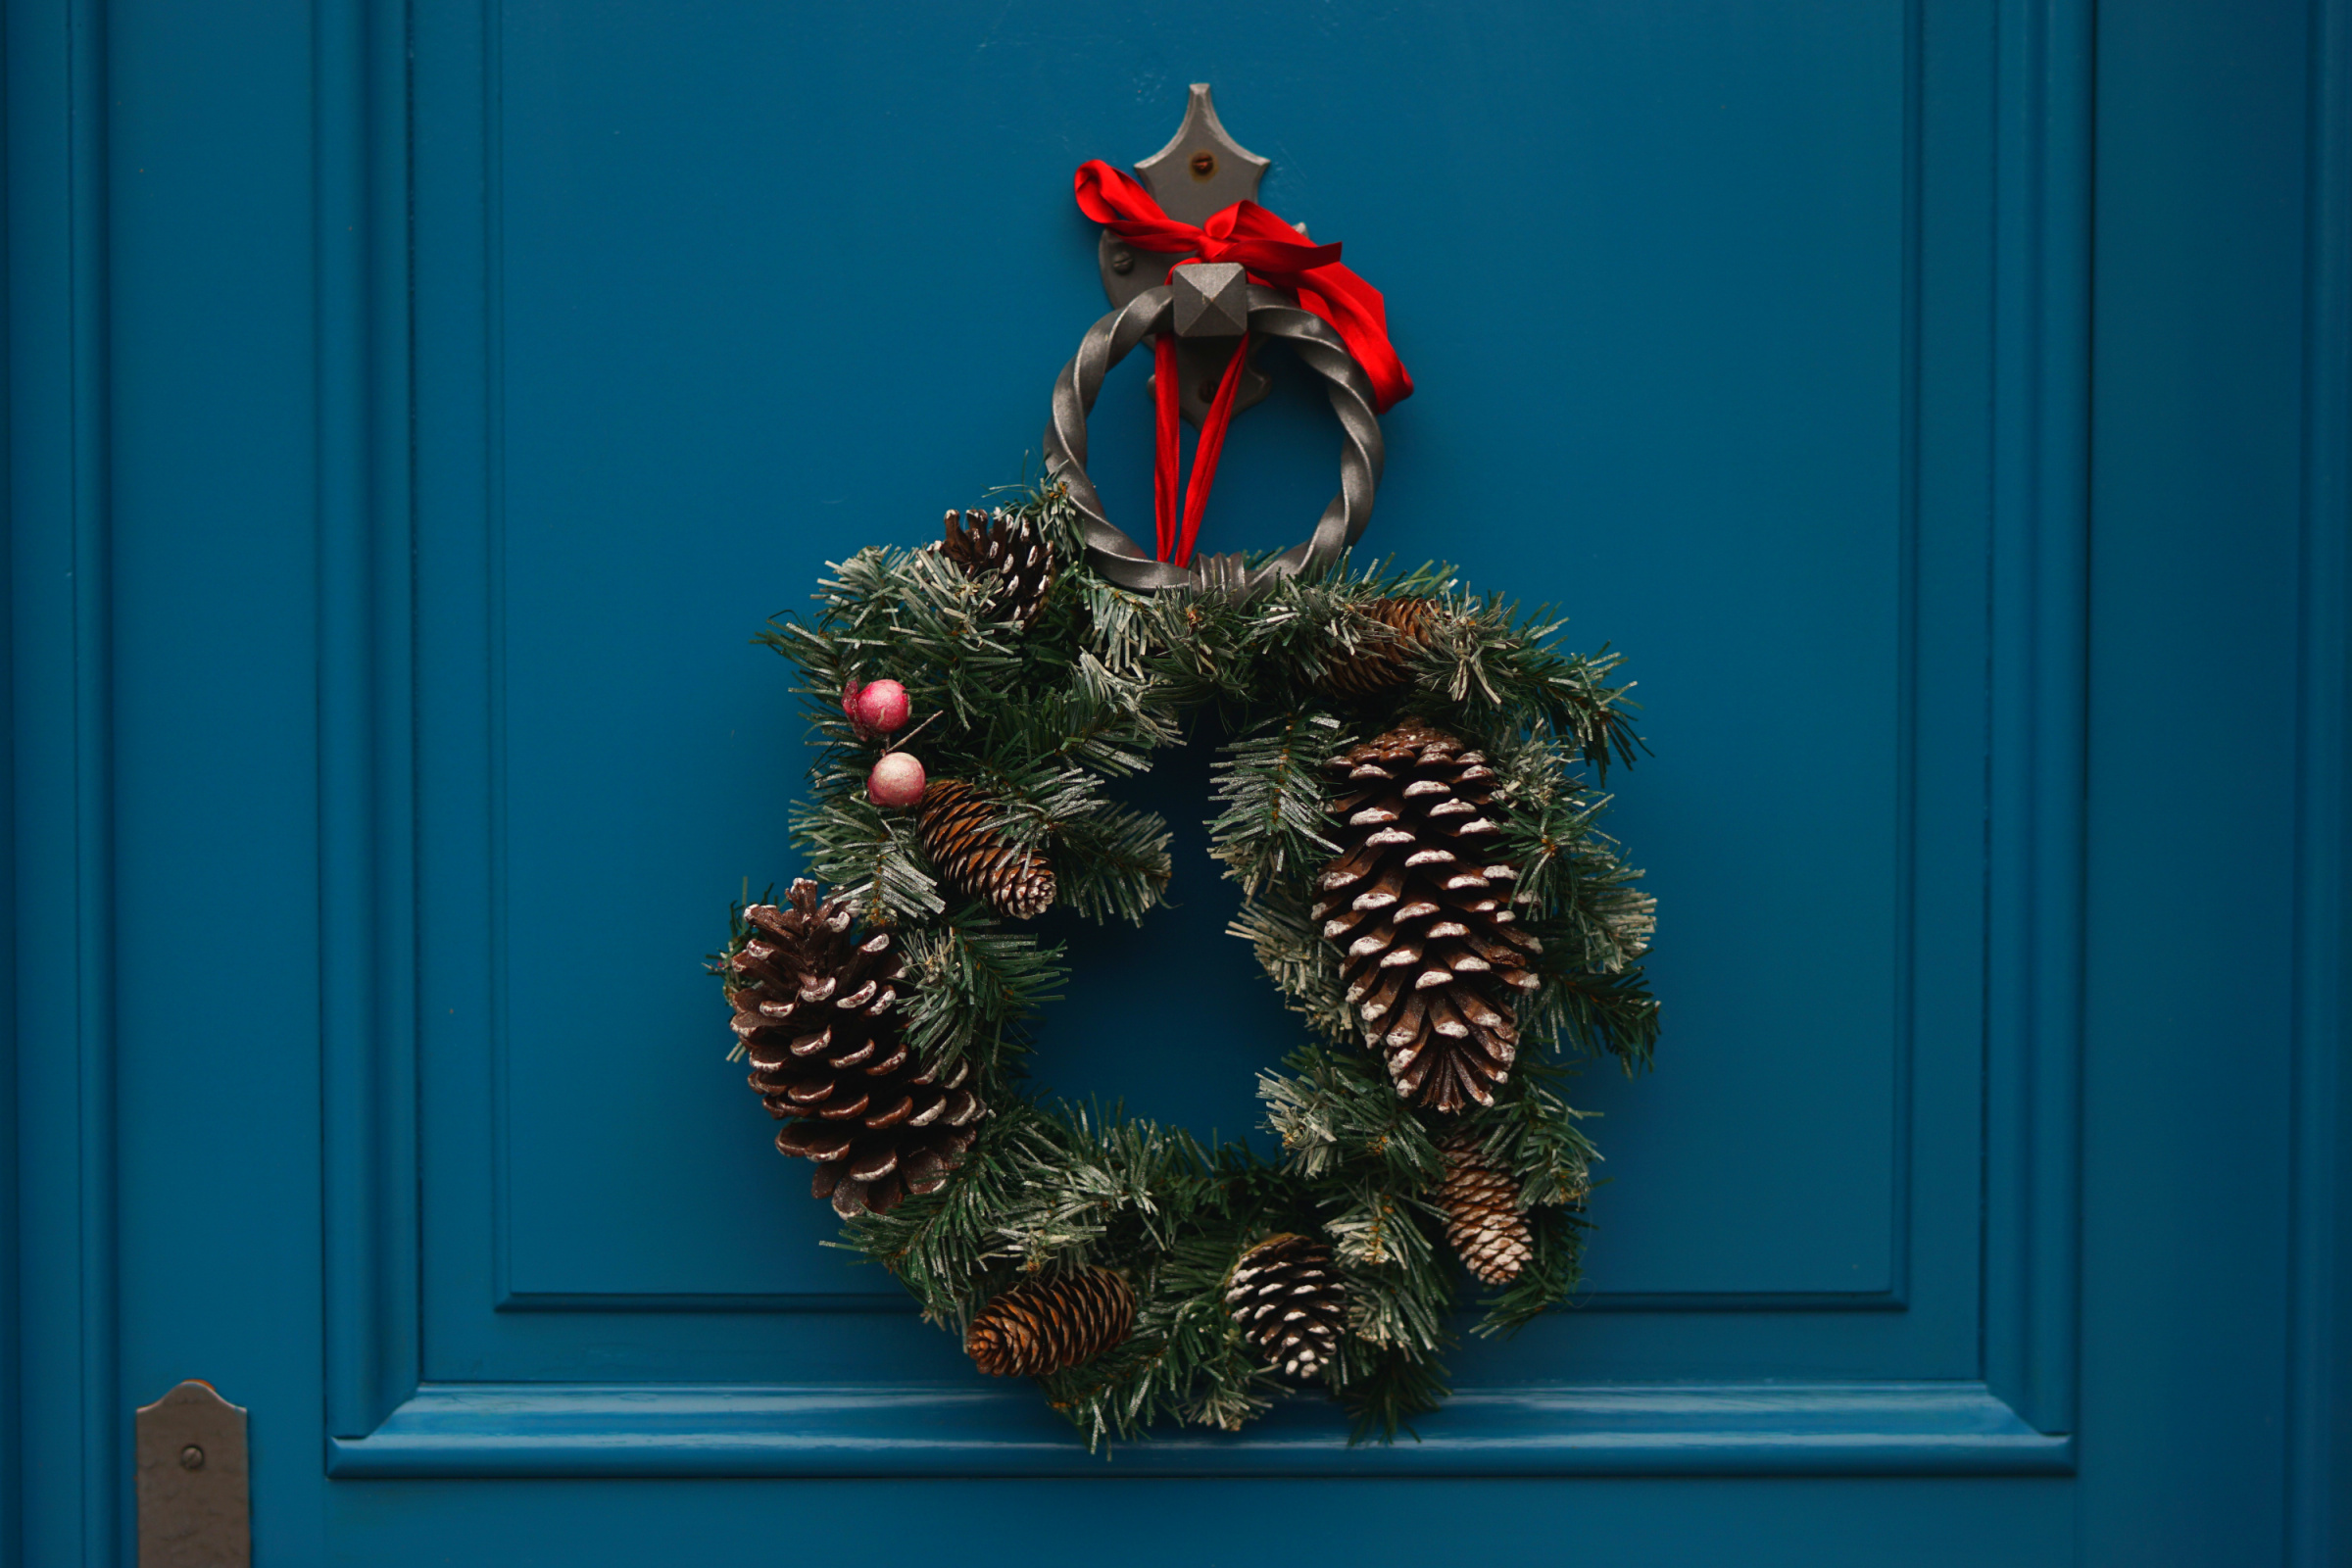 Merry Christmas from The Cabinet Store + Culina Design Team!